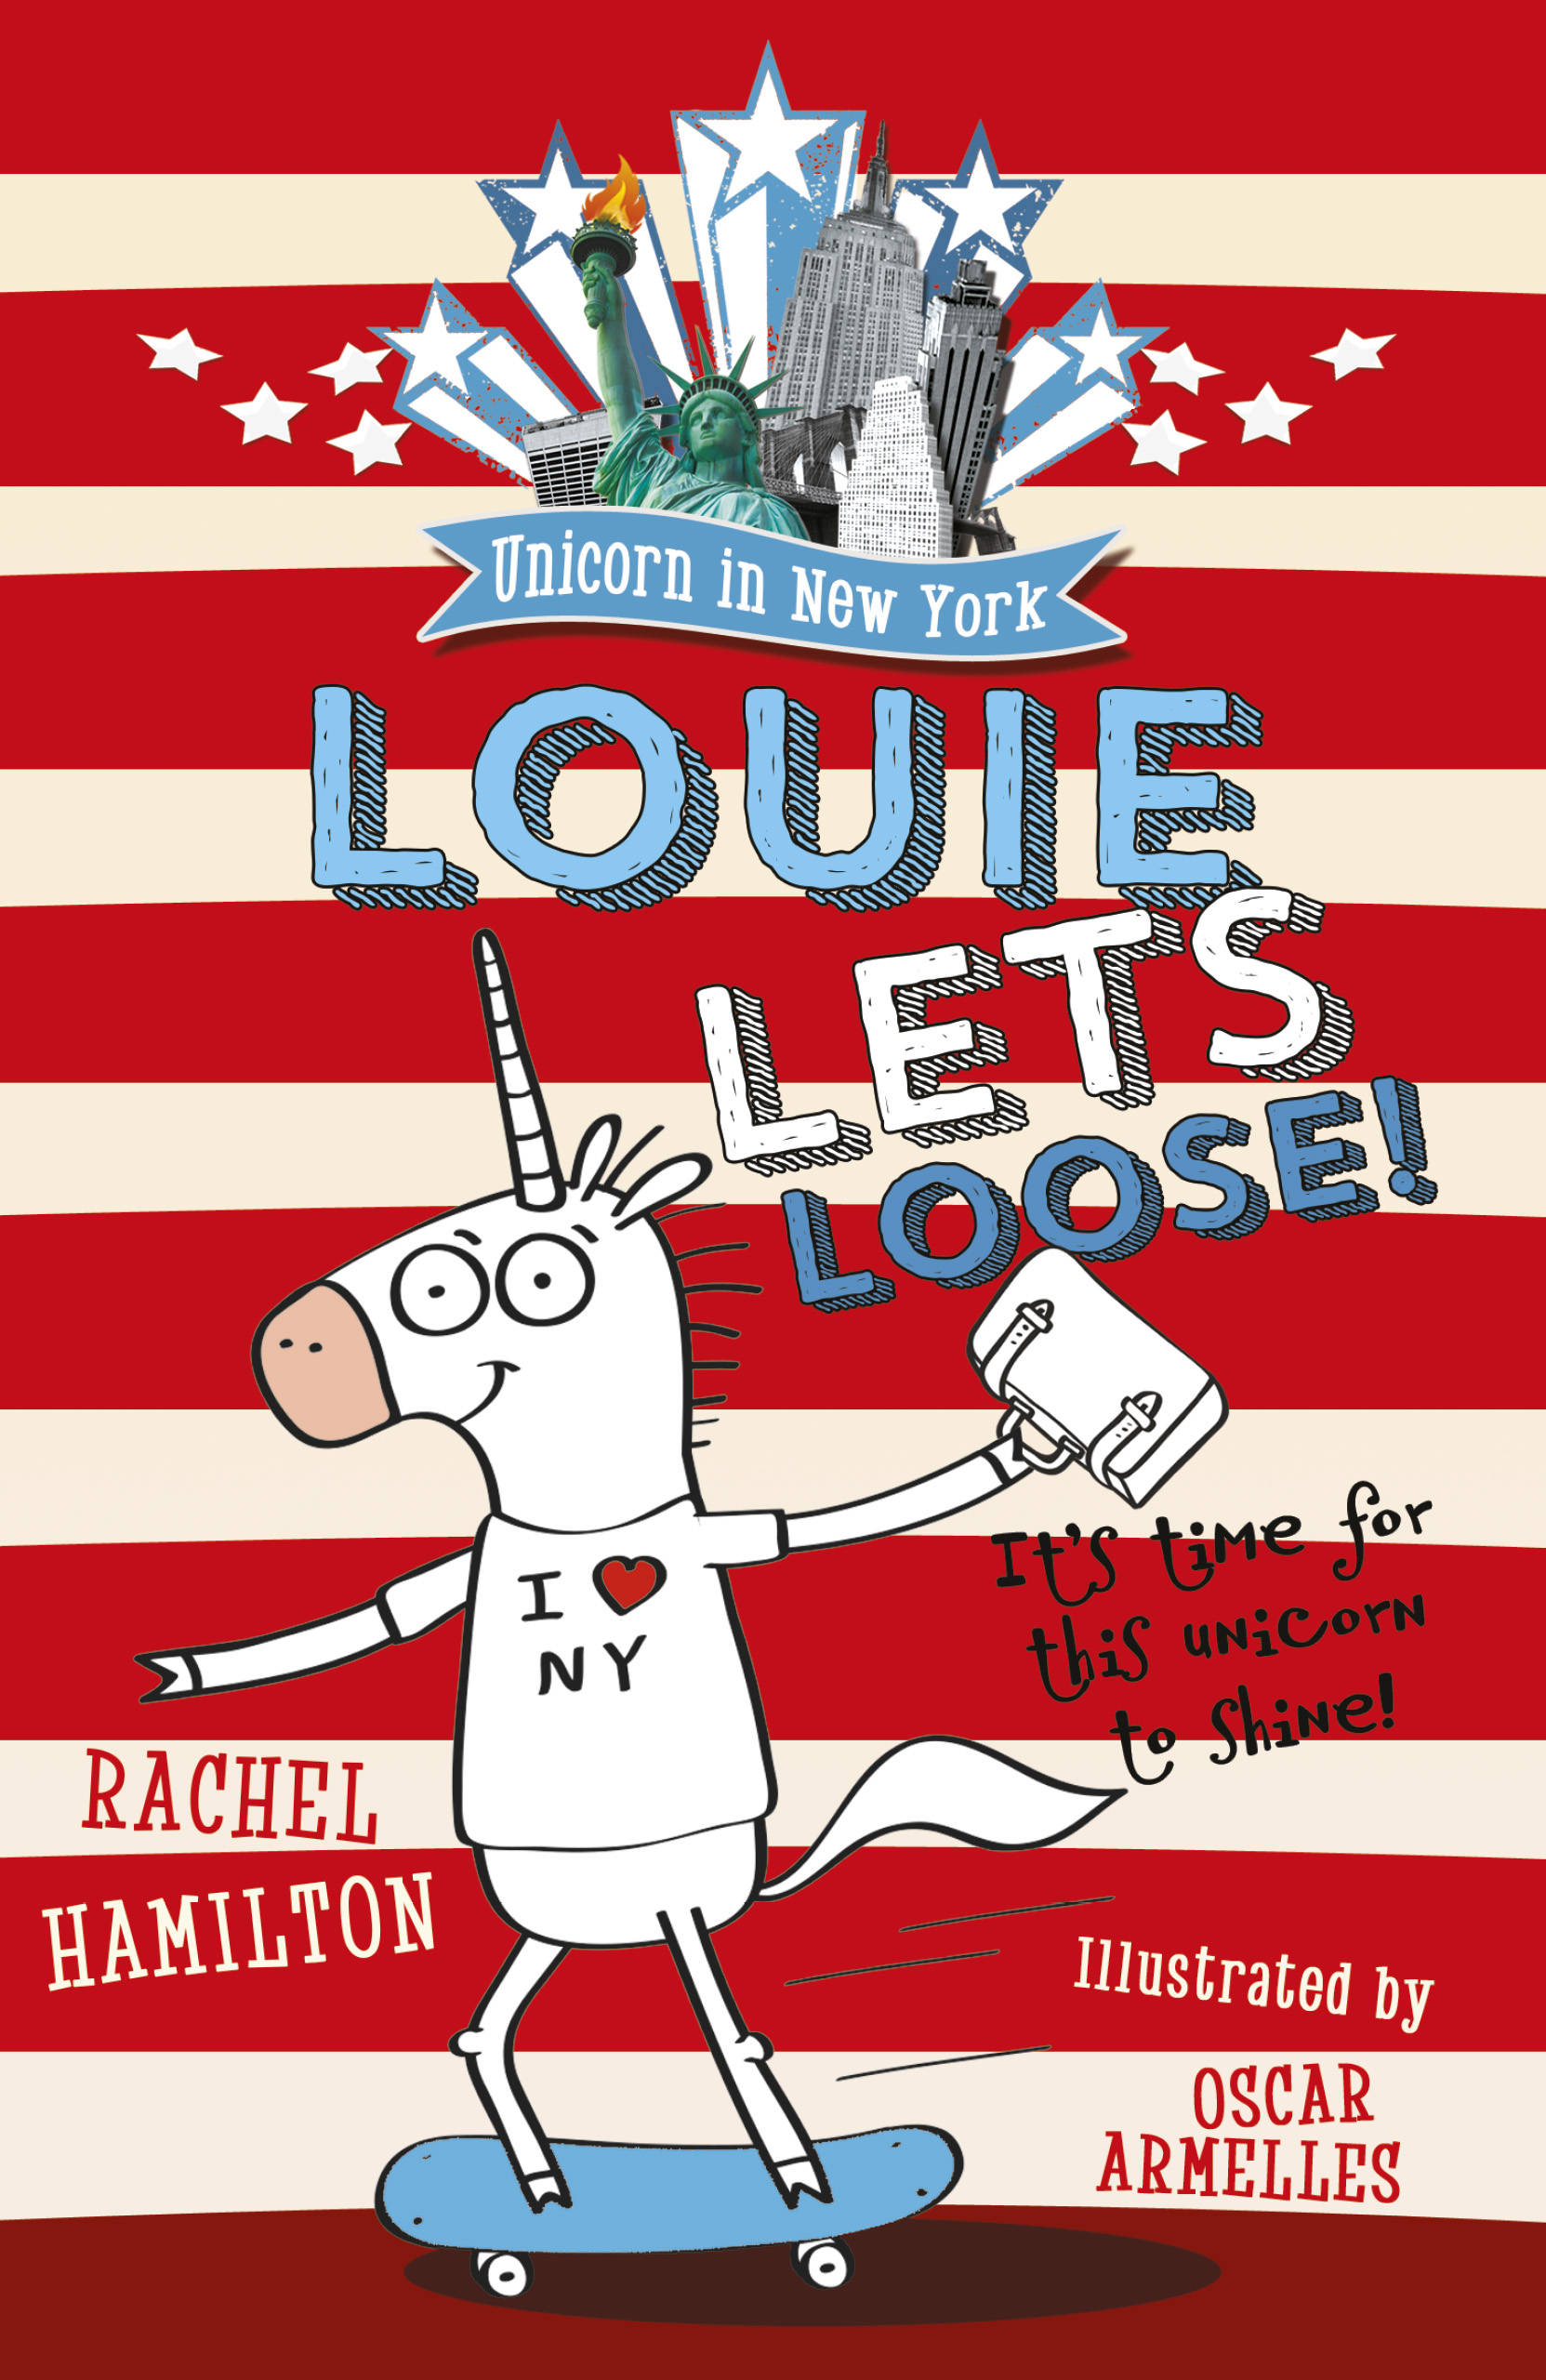 Unicorn in New York: Louie Lets Loose!